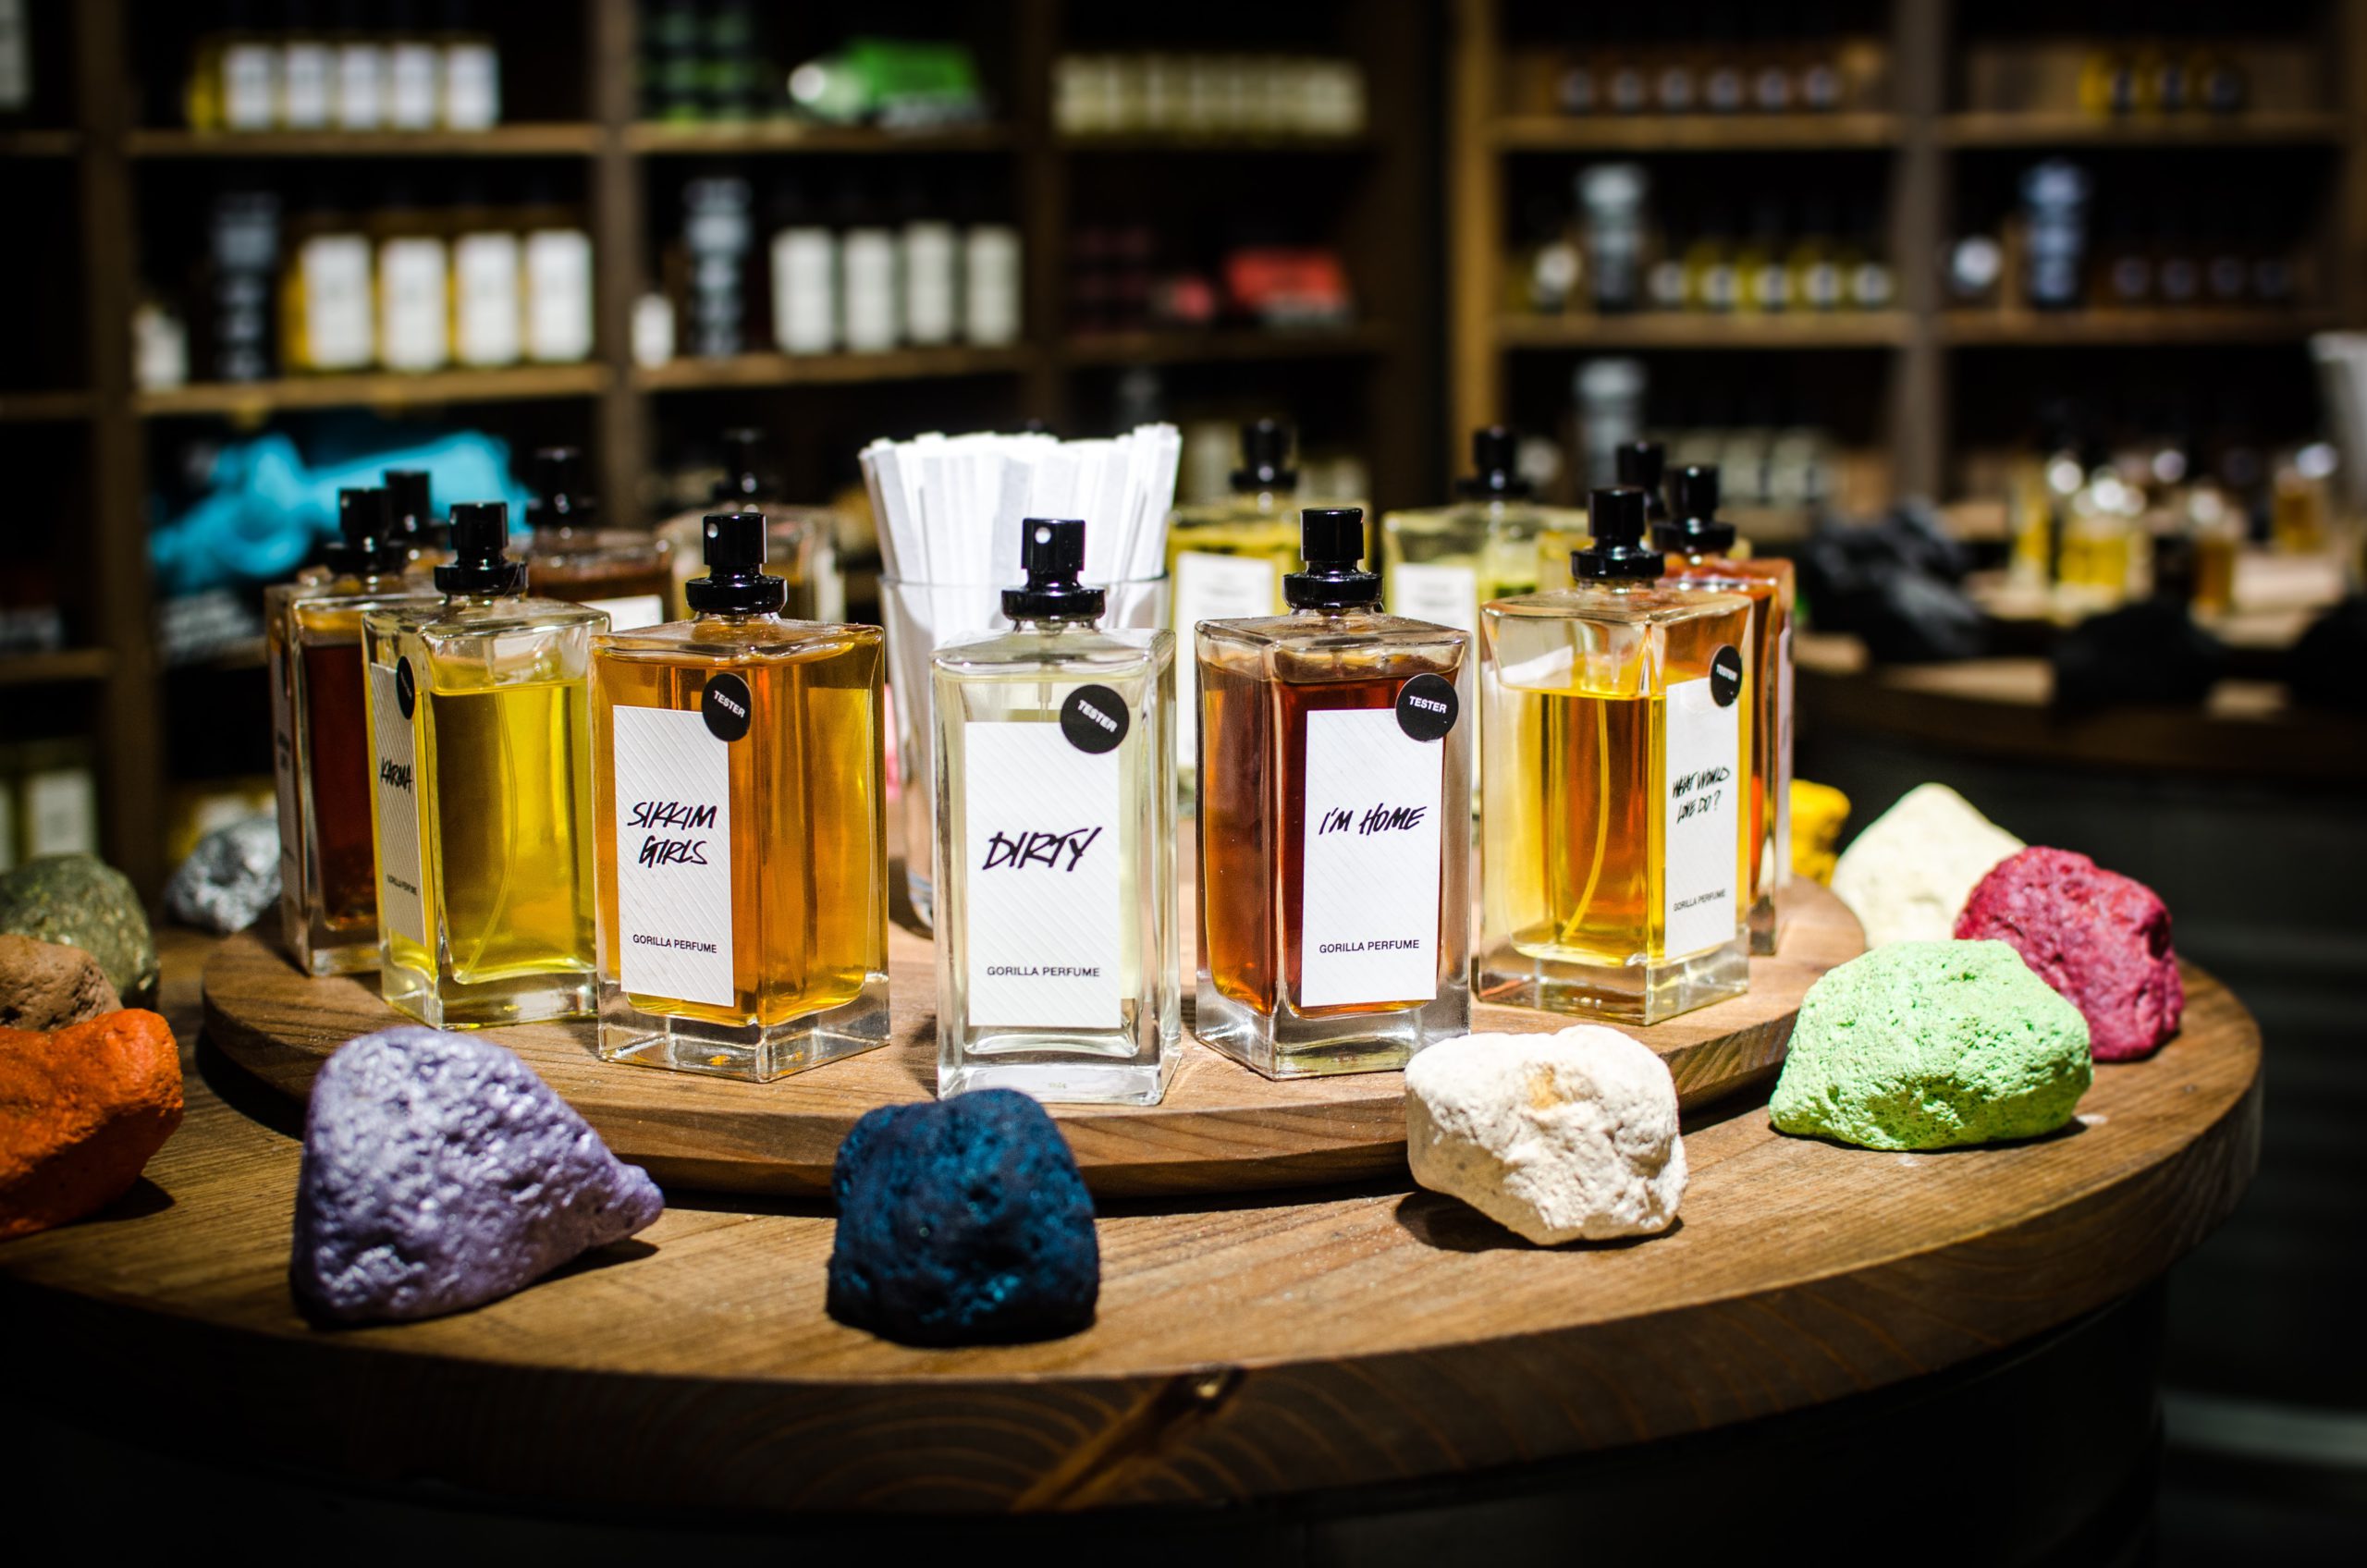 Vancouver Magazine: What’s Inside the Lush Factory?